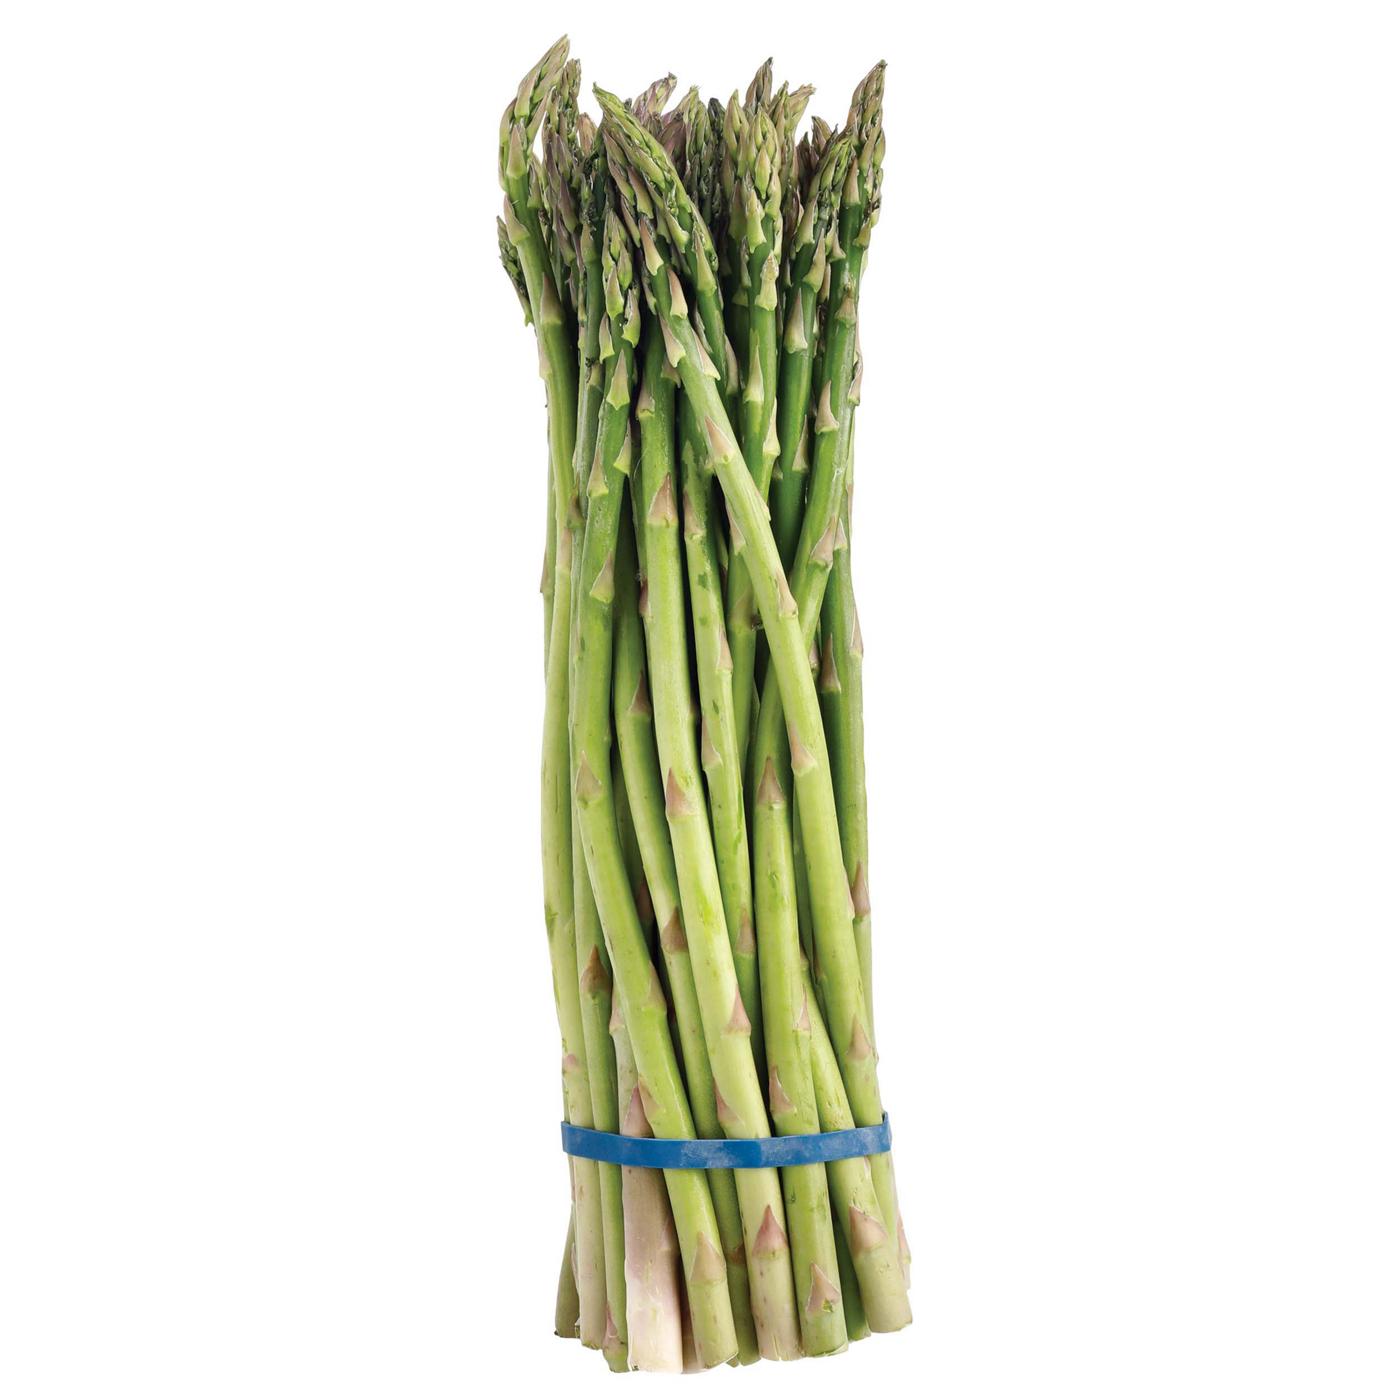 Fresh Asparagus Bunch; image 3 of 3